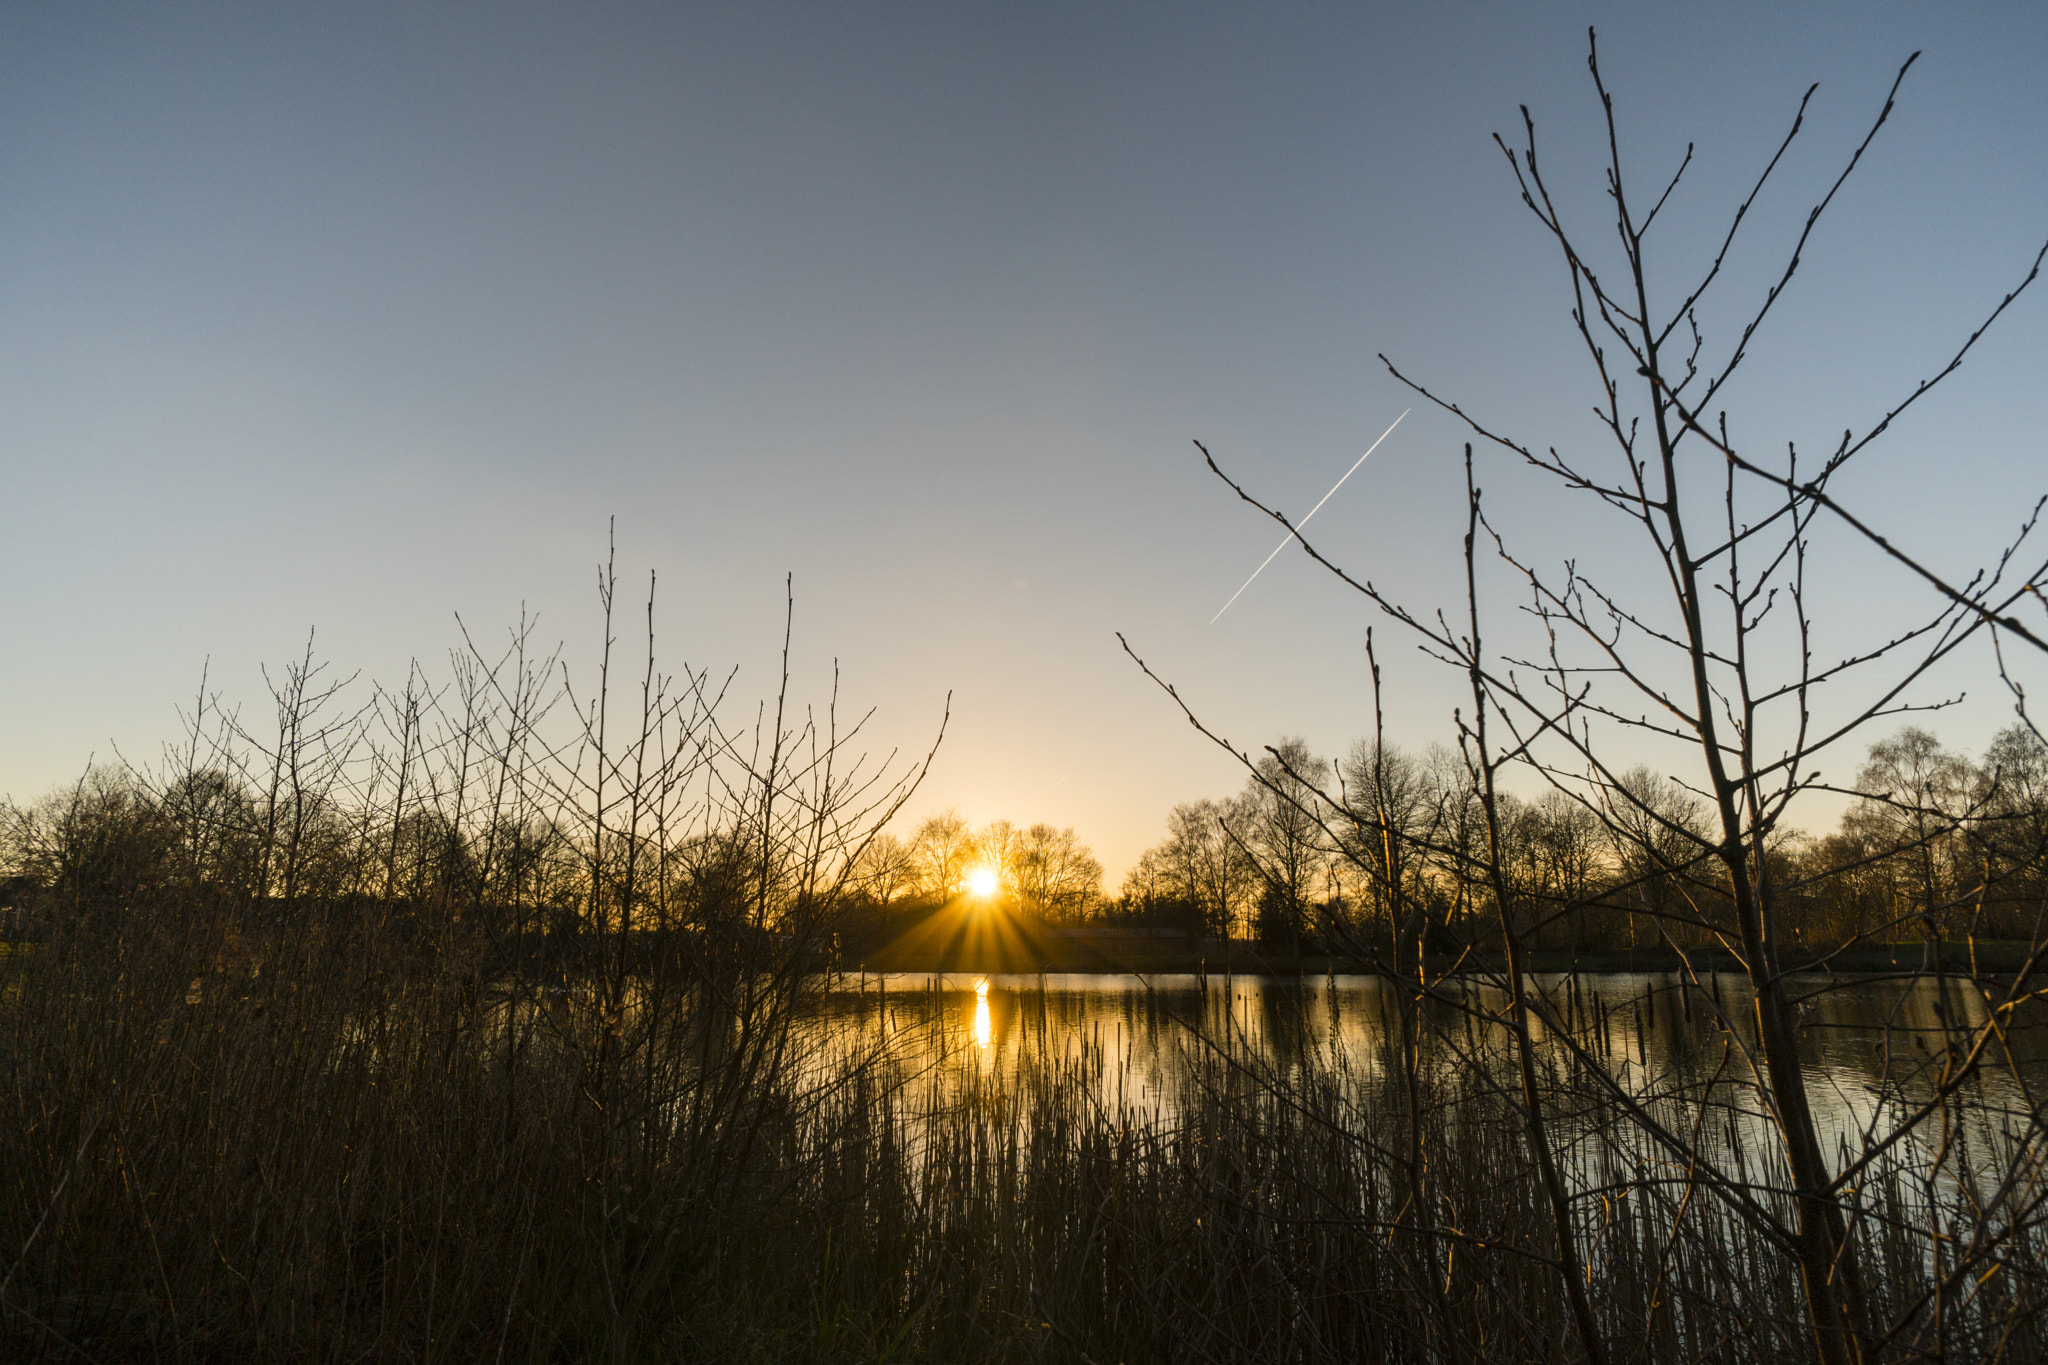 Sony a6300 + ZEISS Touit 12mm F2.8 sample photo. Sunset 1 of 2 aaltinksweg, holten, the netherlands photography